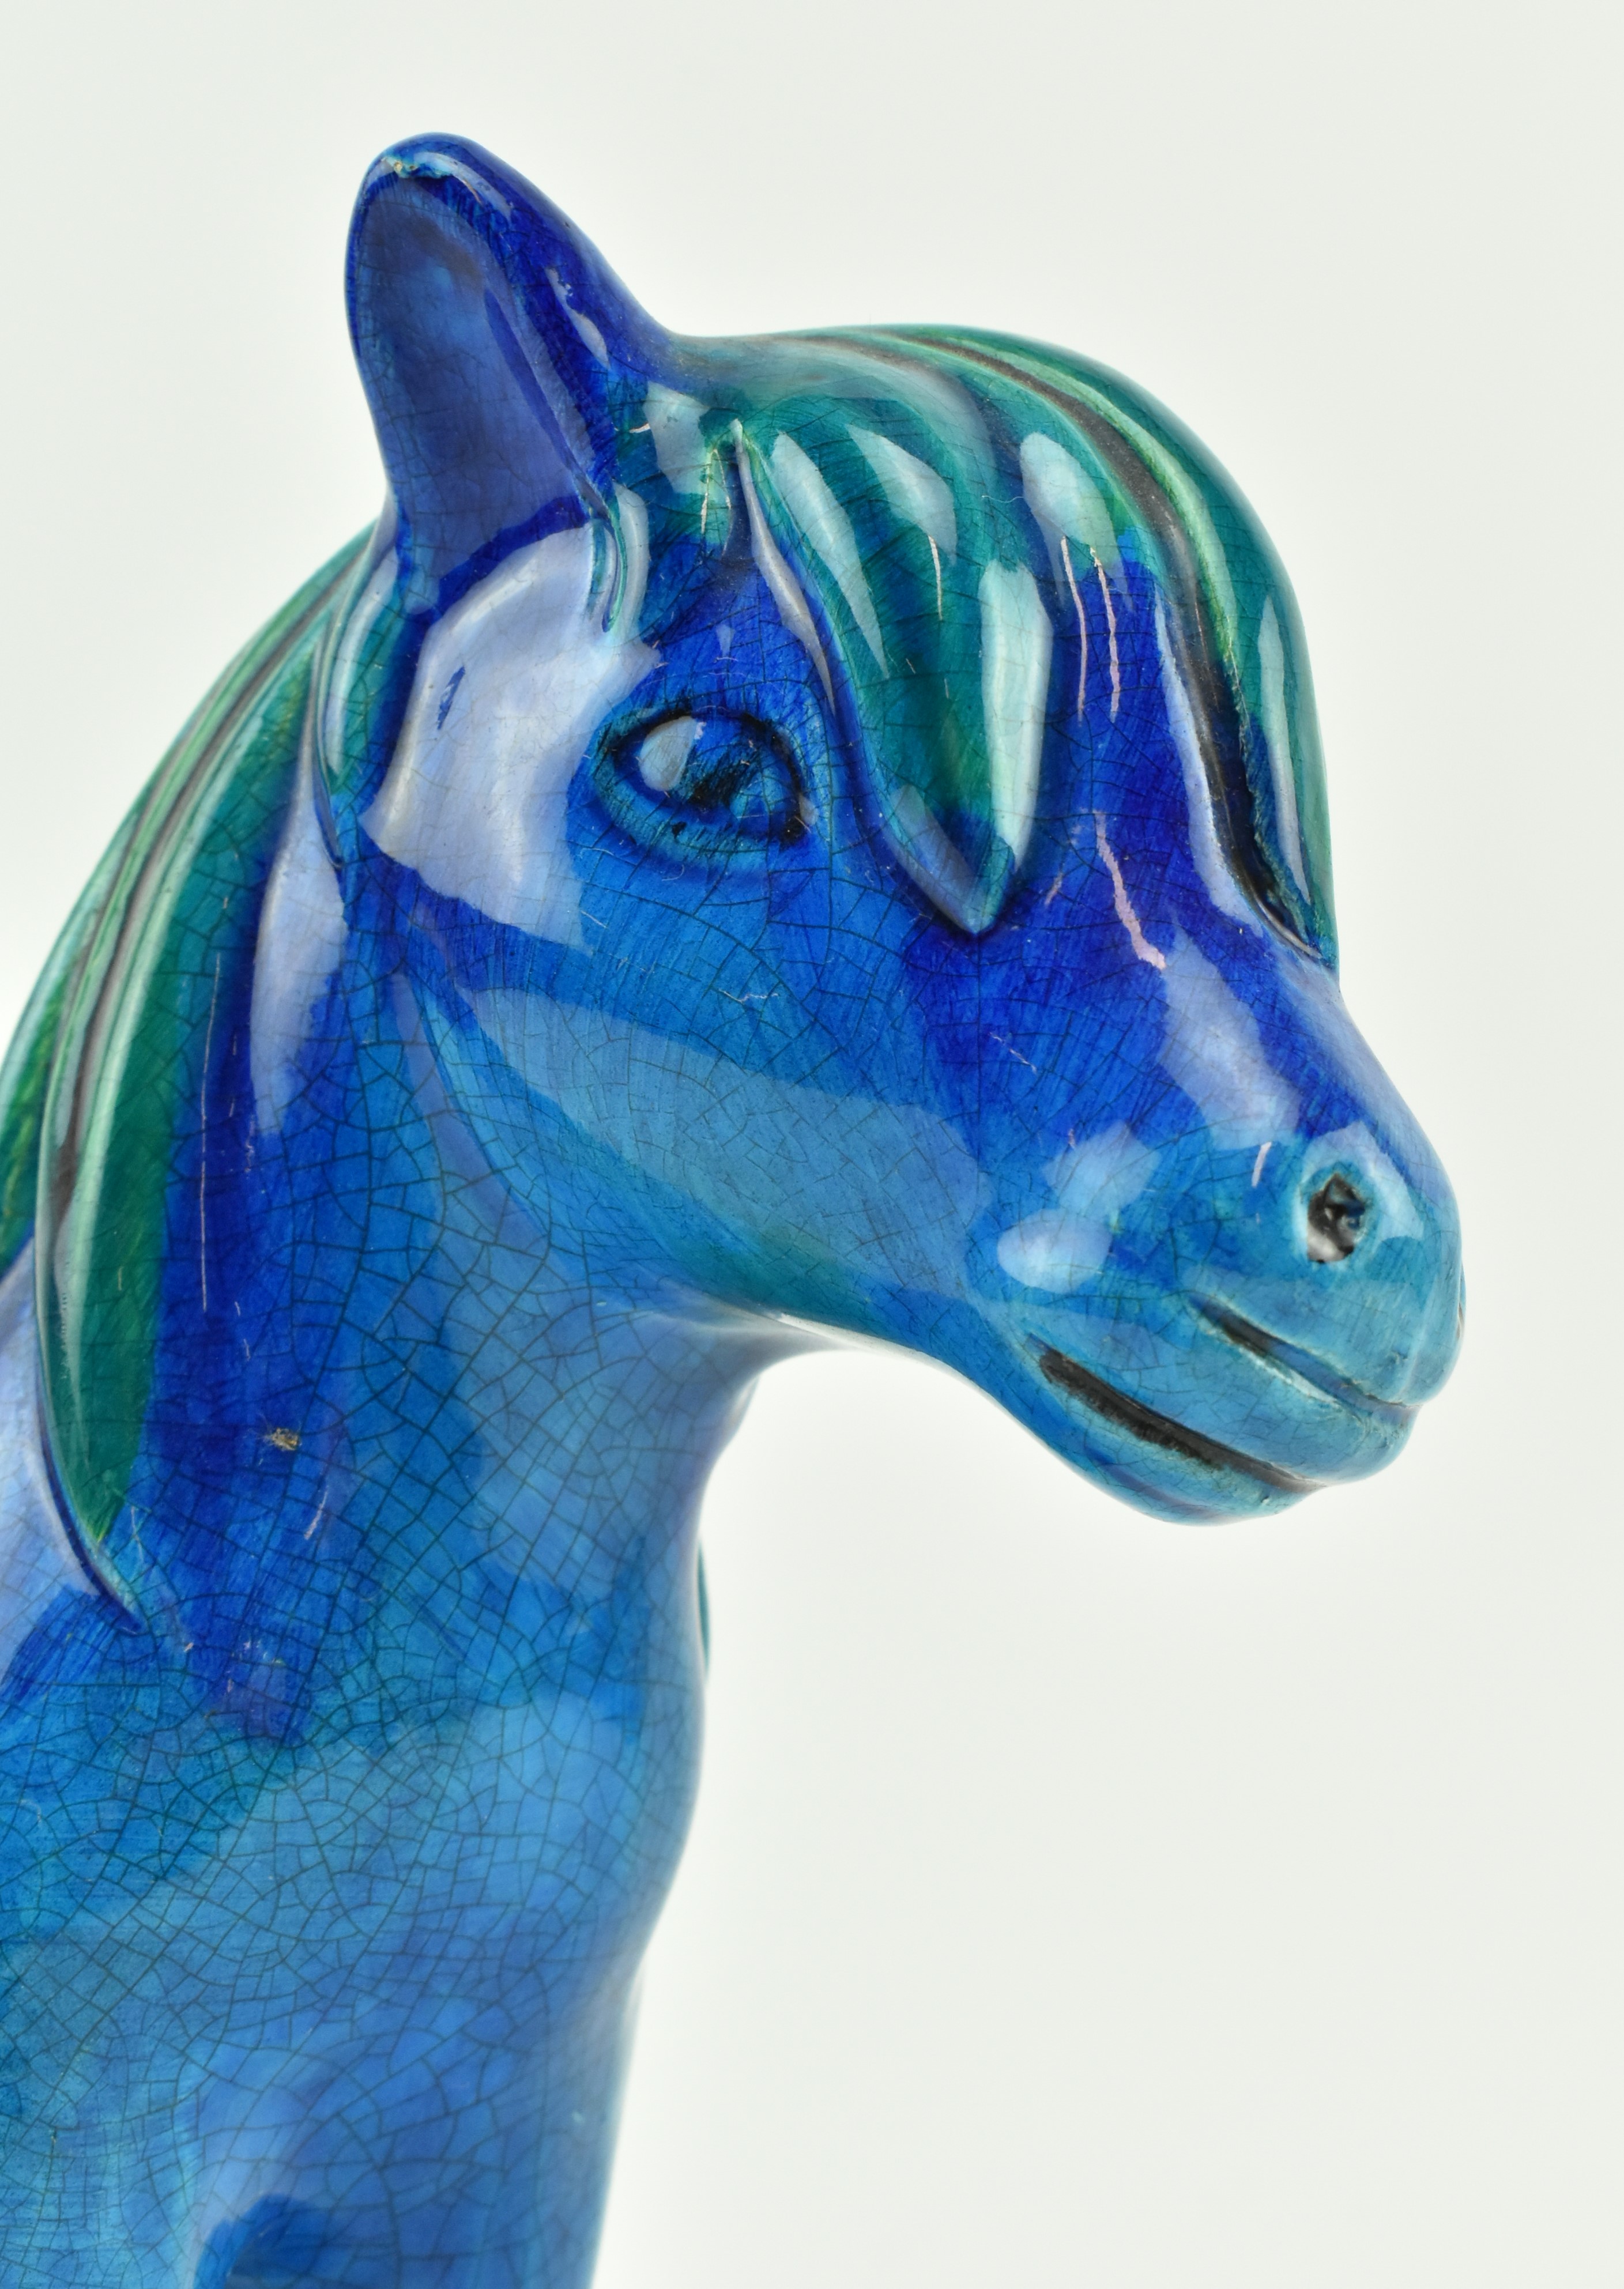 VINTAGE ITALIAN CERAMIC HORSE IN THE STYLE OF BITOSSI - Image 2 of 6